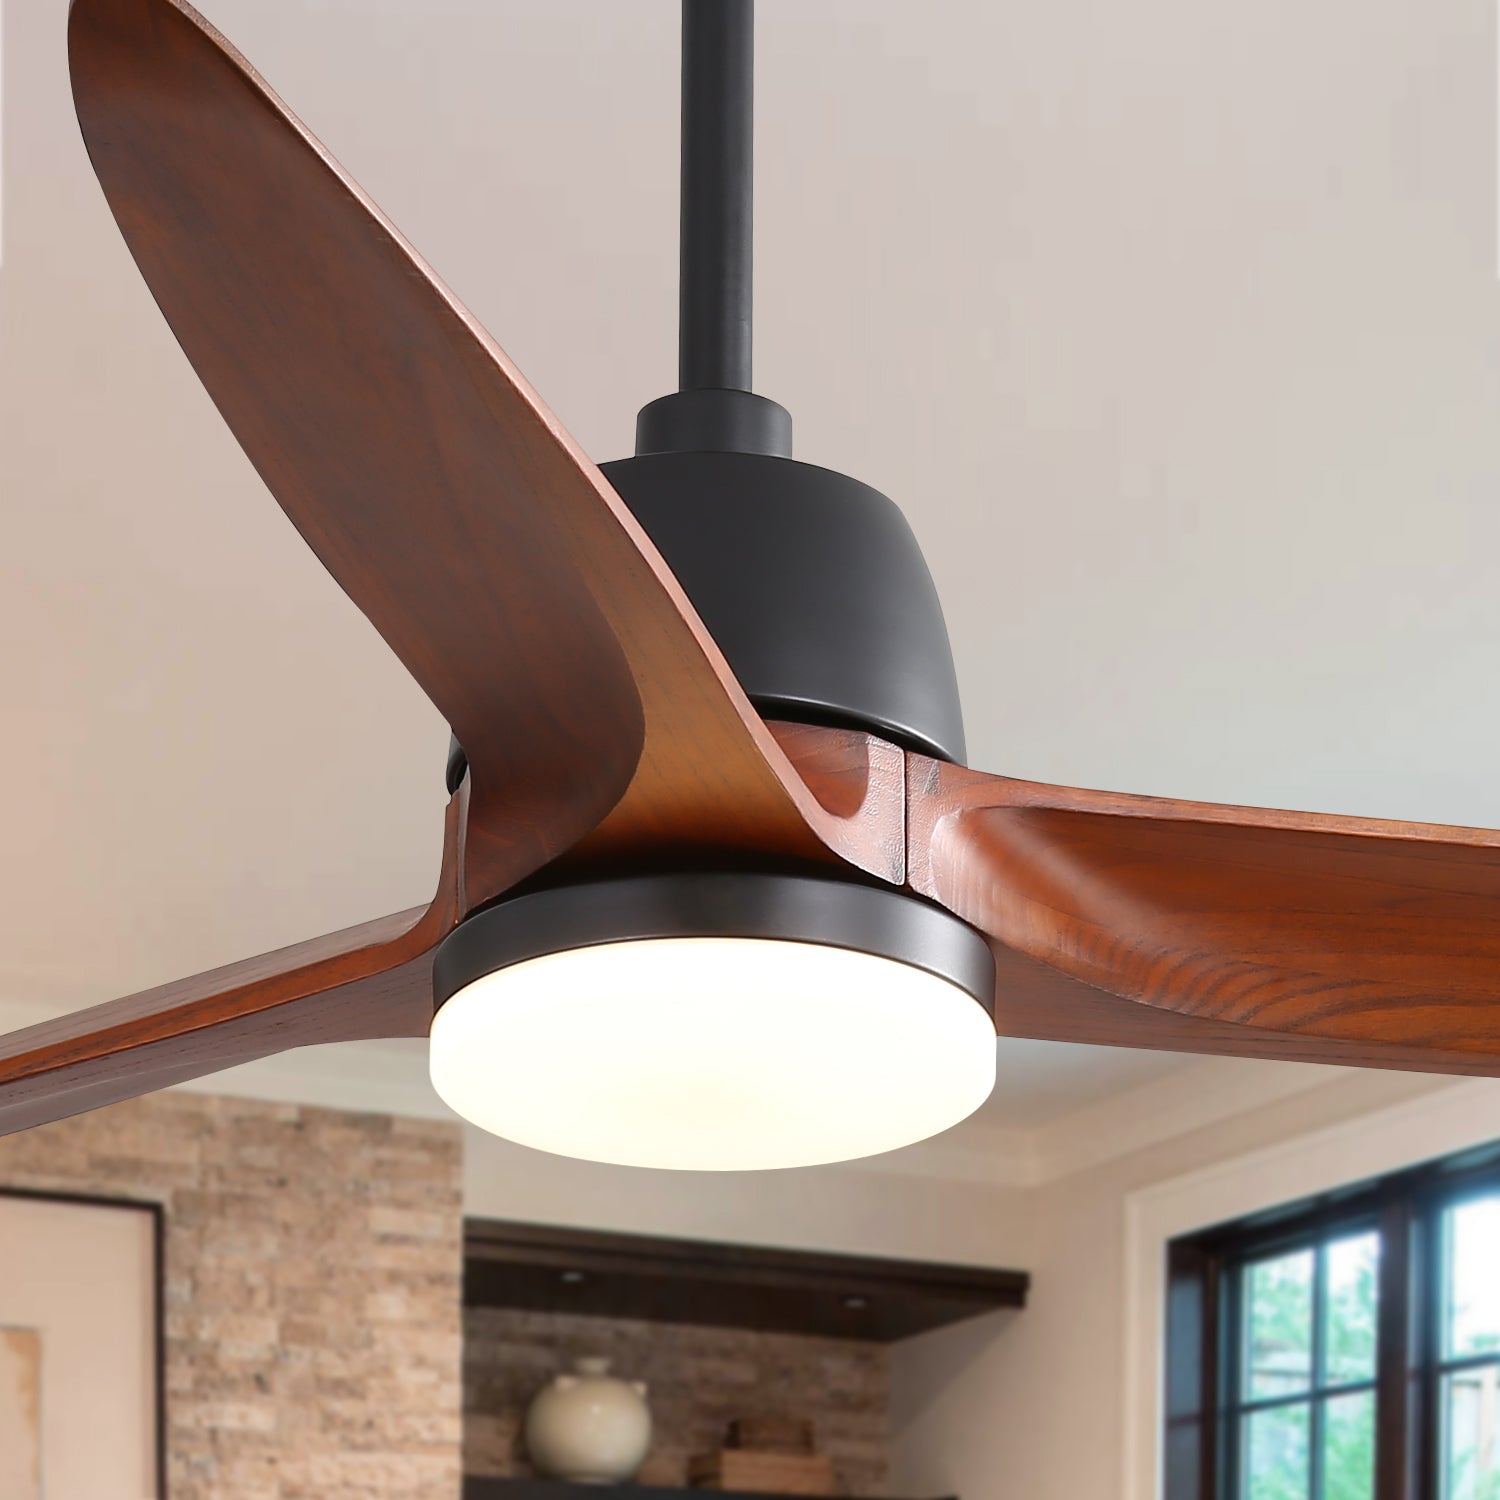 56 Inch Ceiling Fan Light With 6 Speed Remote Energy black-metal & wood